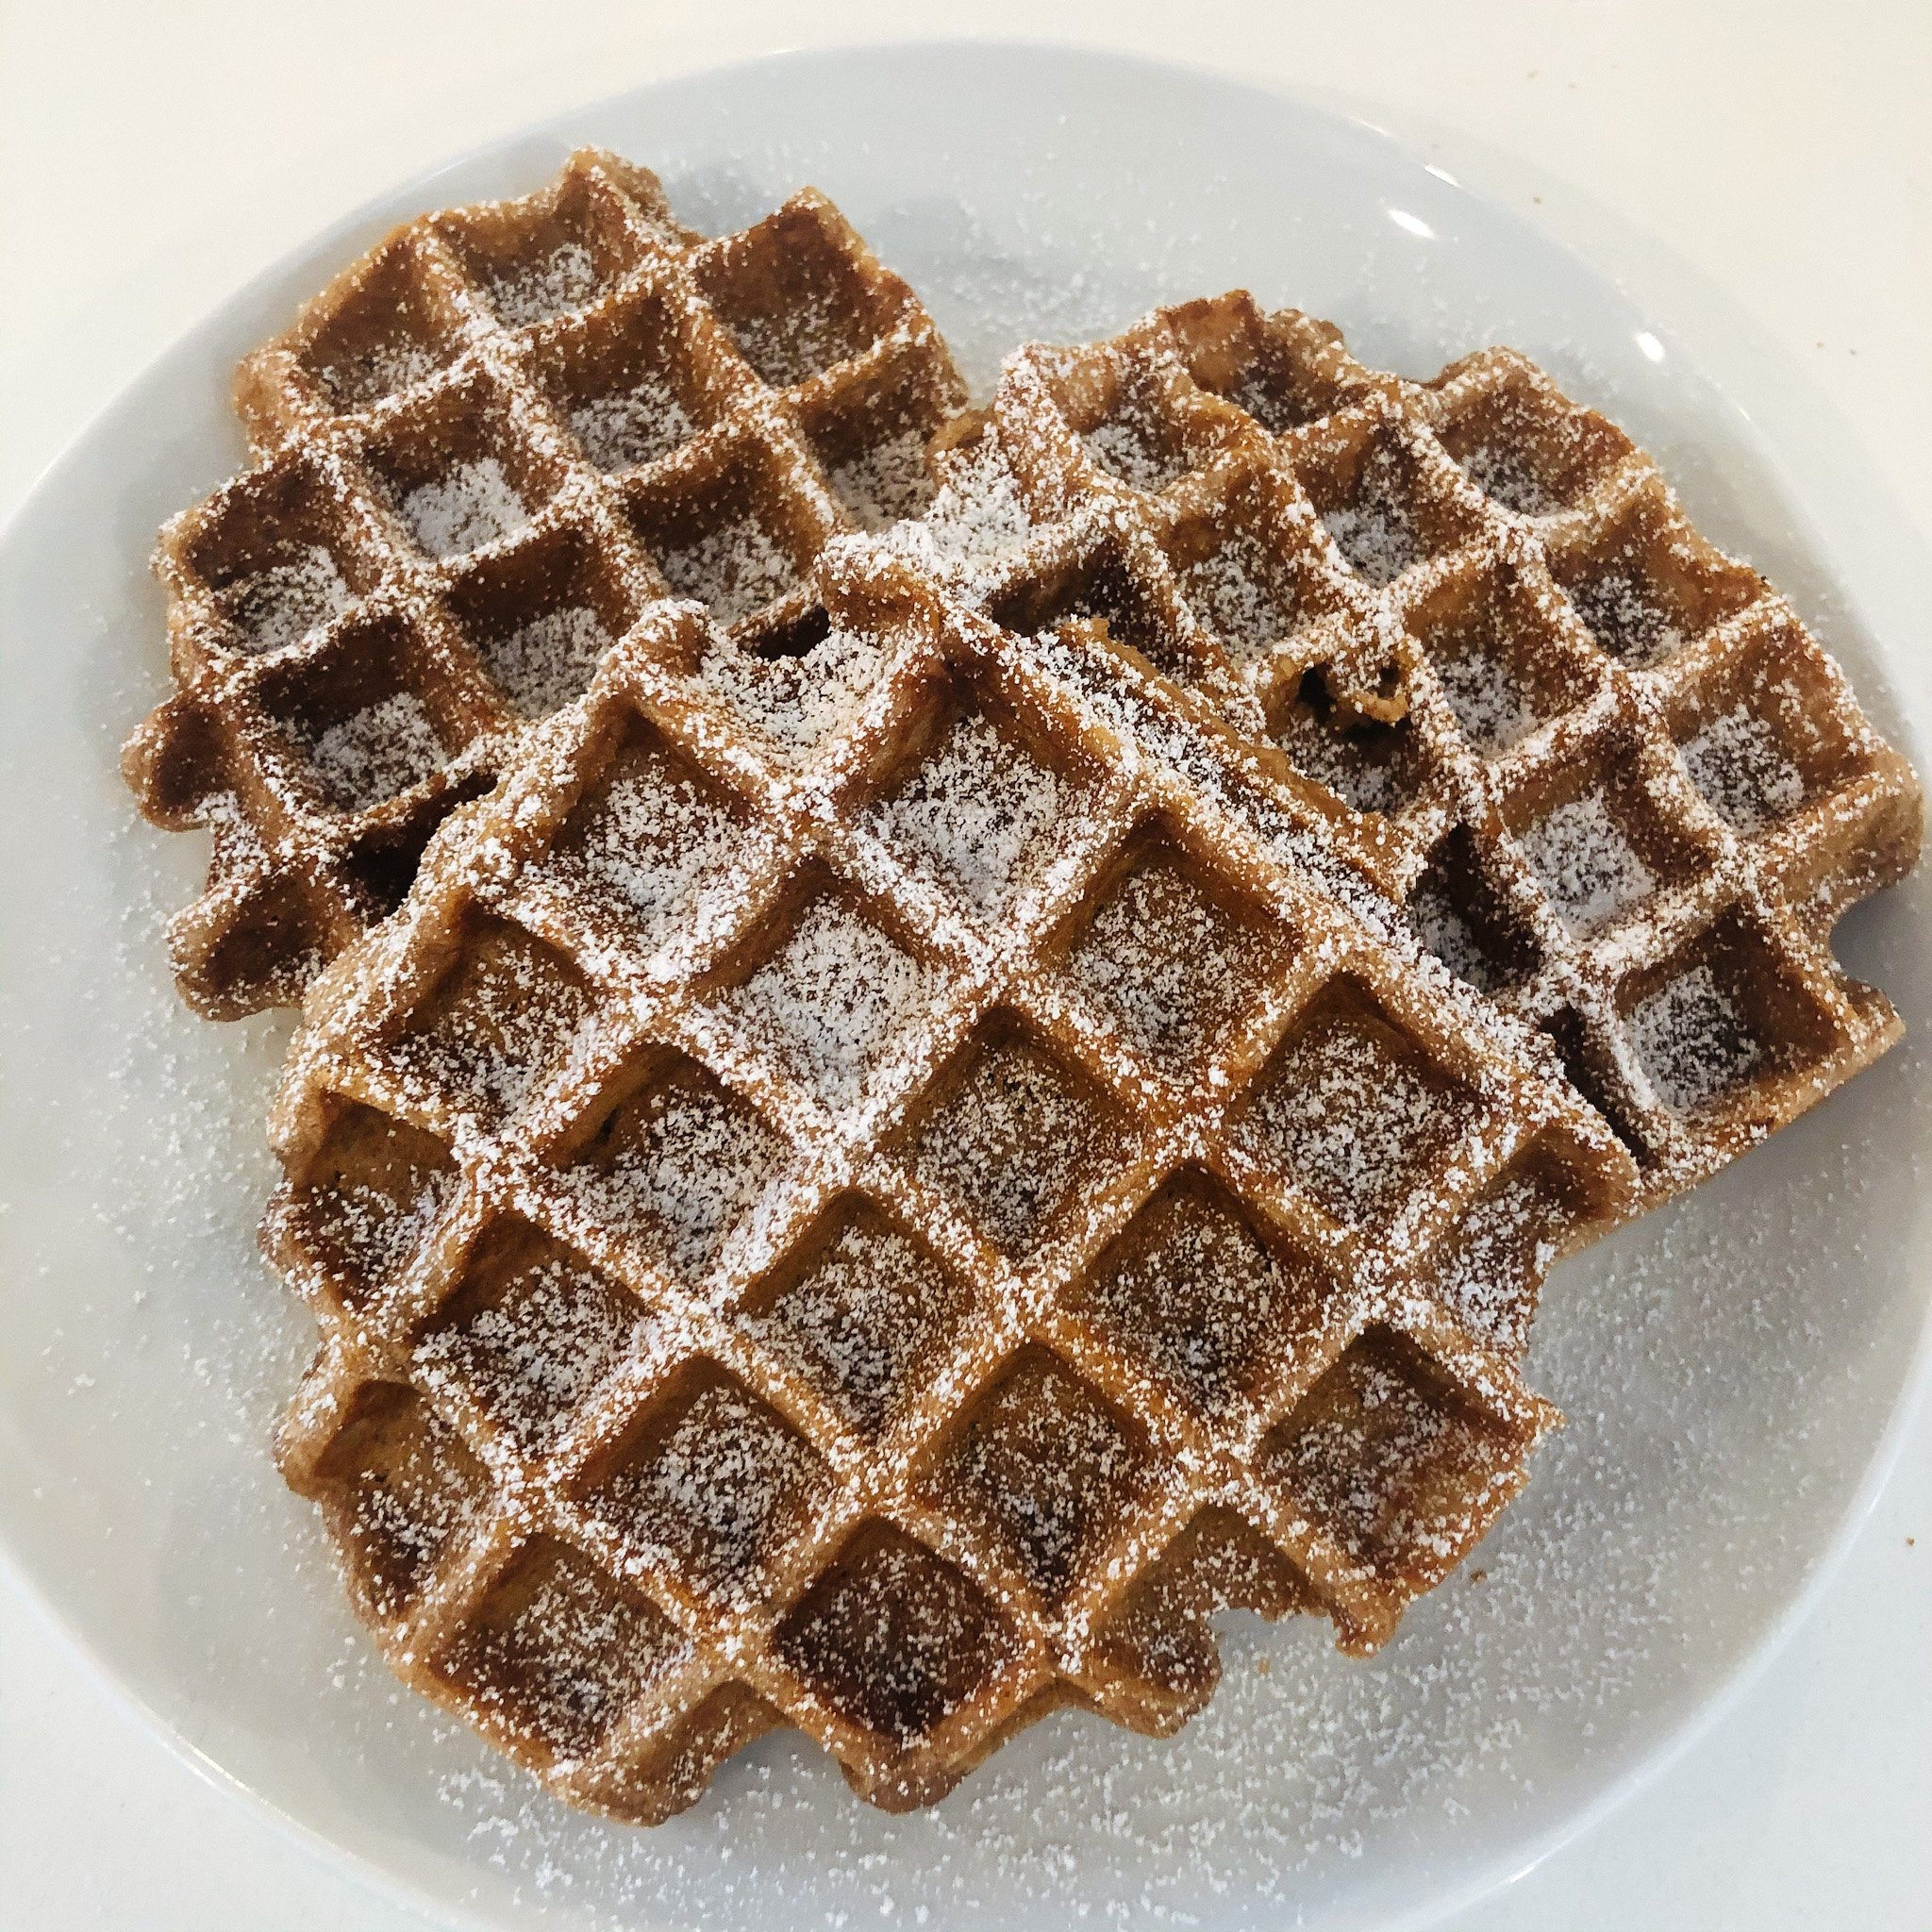 the finished gluten free chocolate belgian waffles dusted with powdered sugar